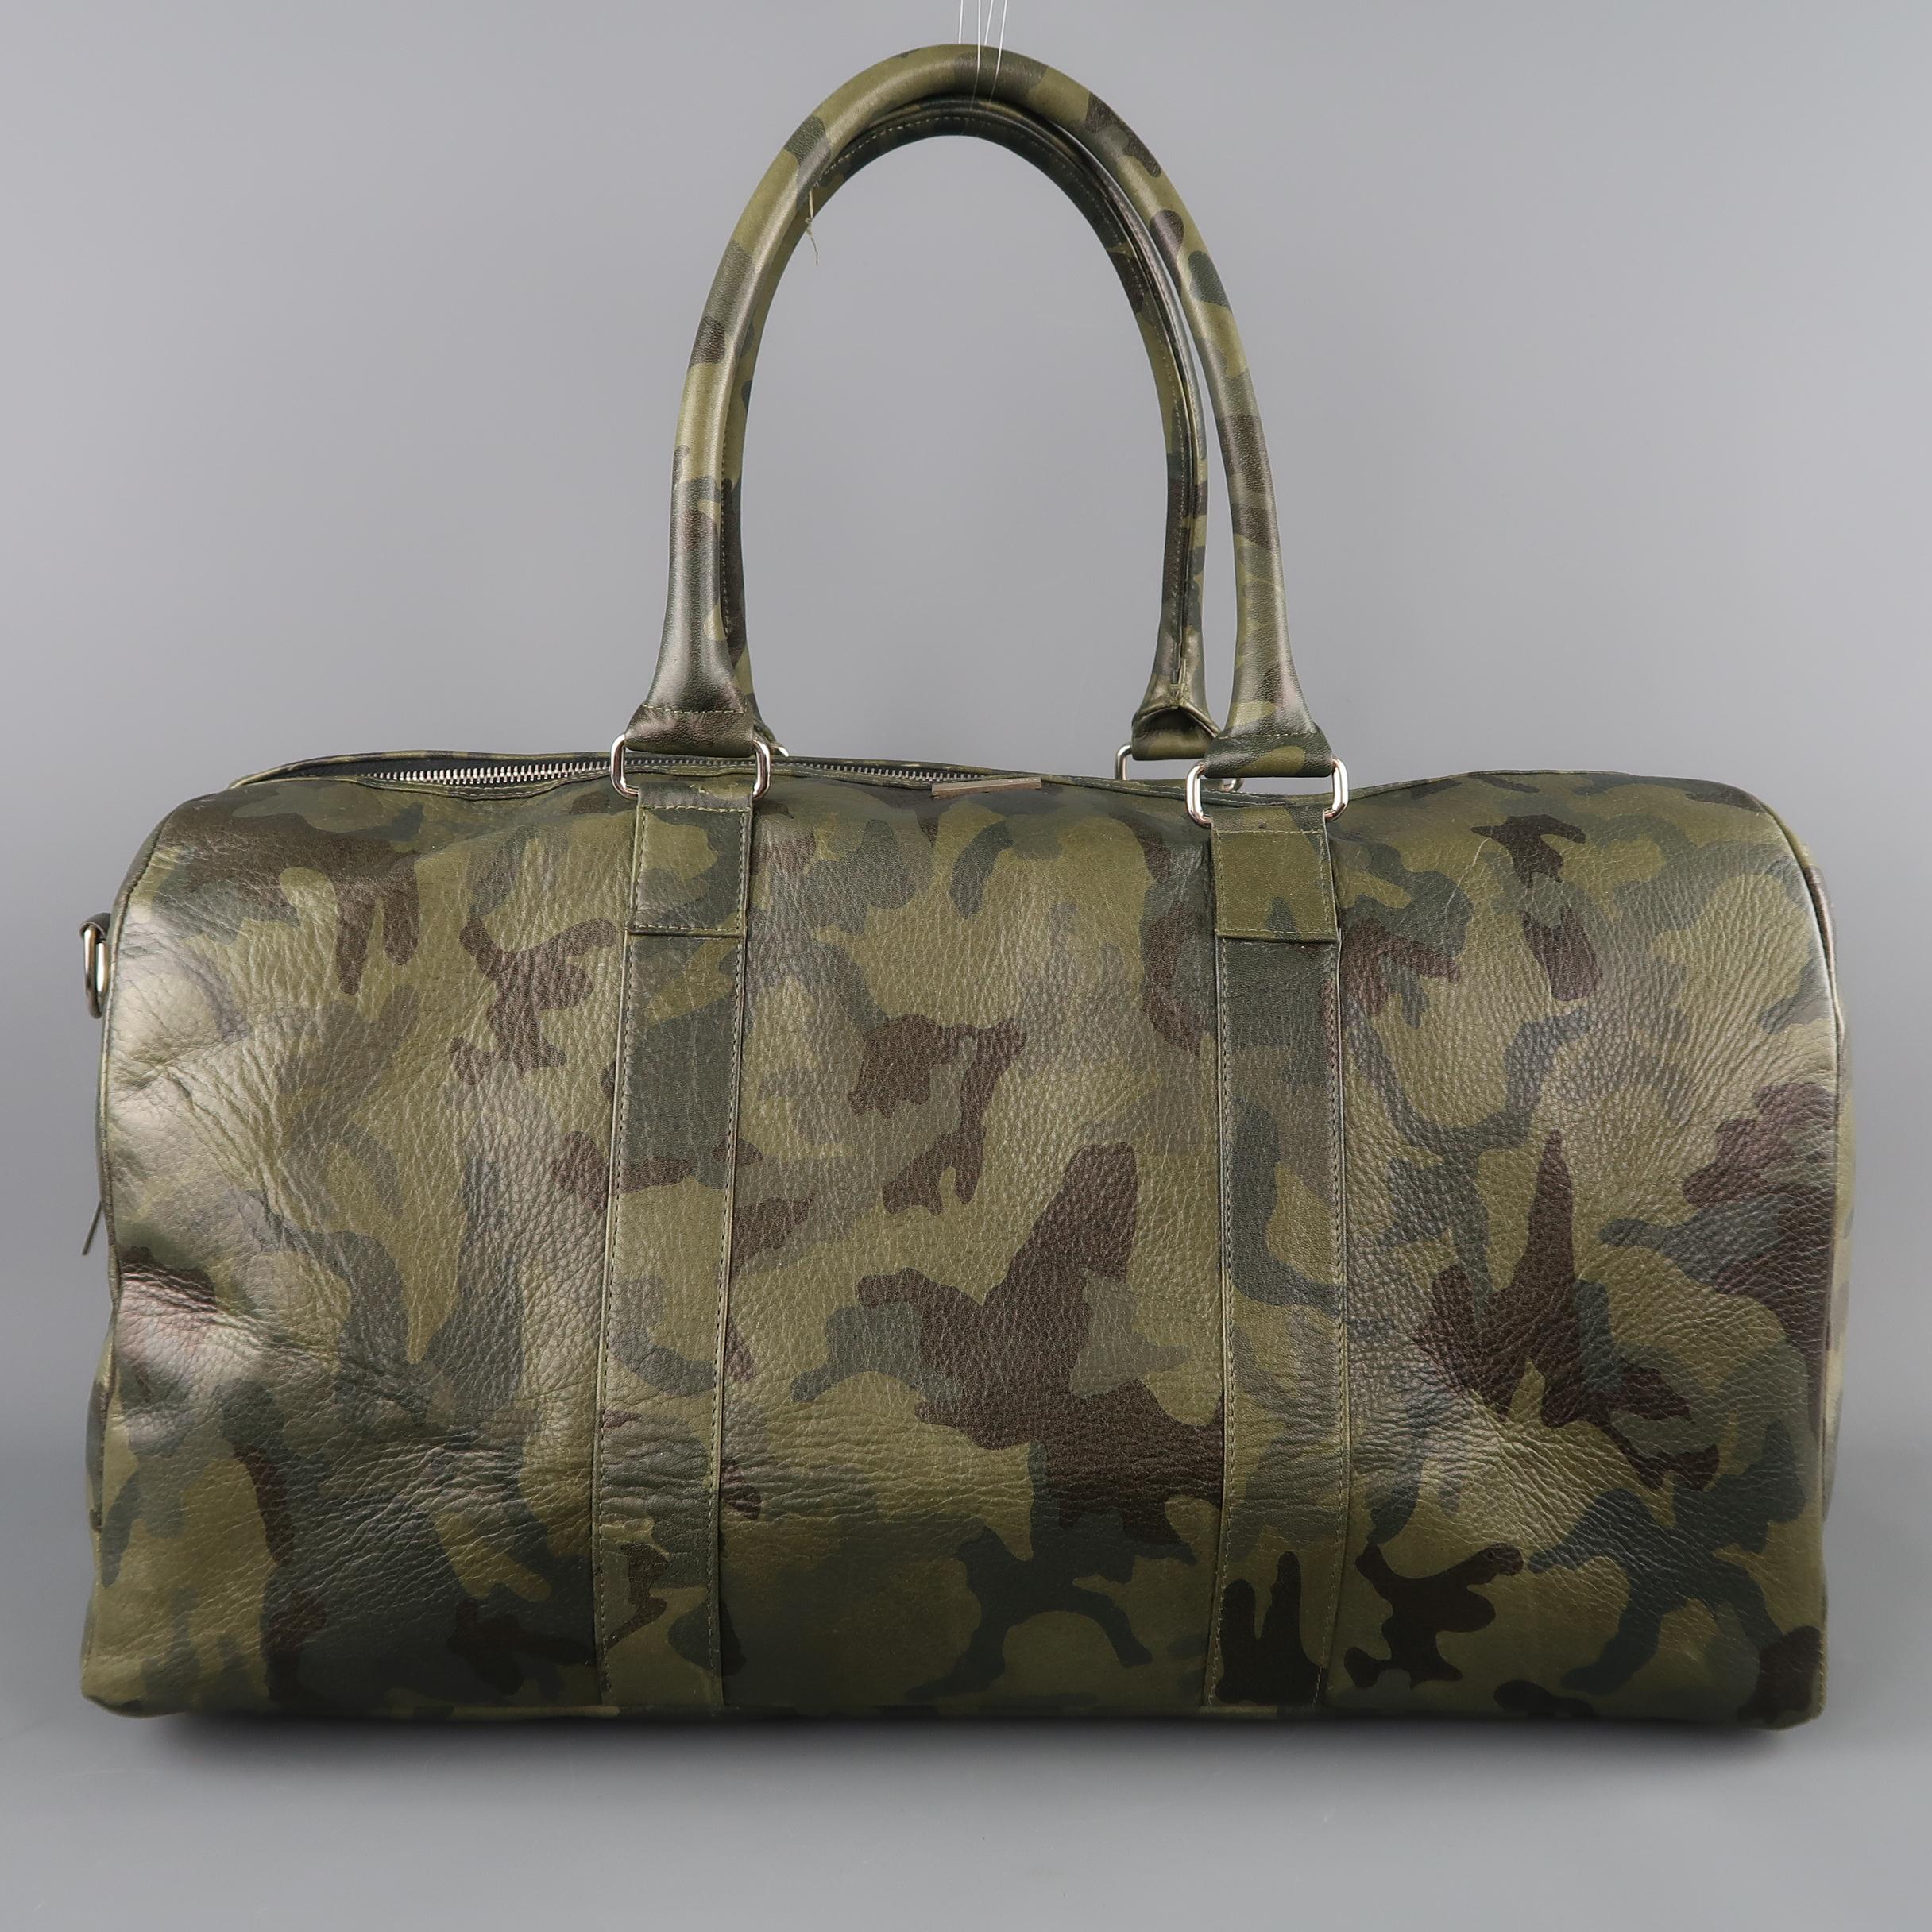 ELIZABETH WEINSTOCK travel weekender bag comes in green camouflage print leather with double wrapped top handles, silver tone hardware, and top zip closure. Detachable shoulder strap included. Made in USA. Retail price $ 1,595.00. 
 
Excellent